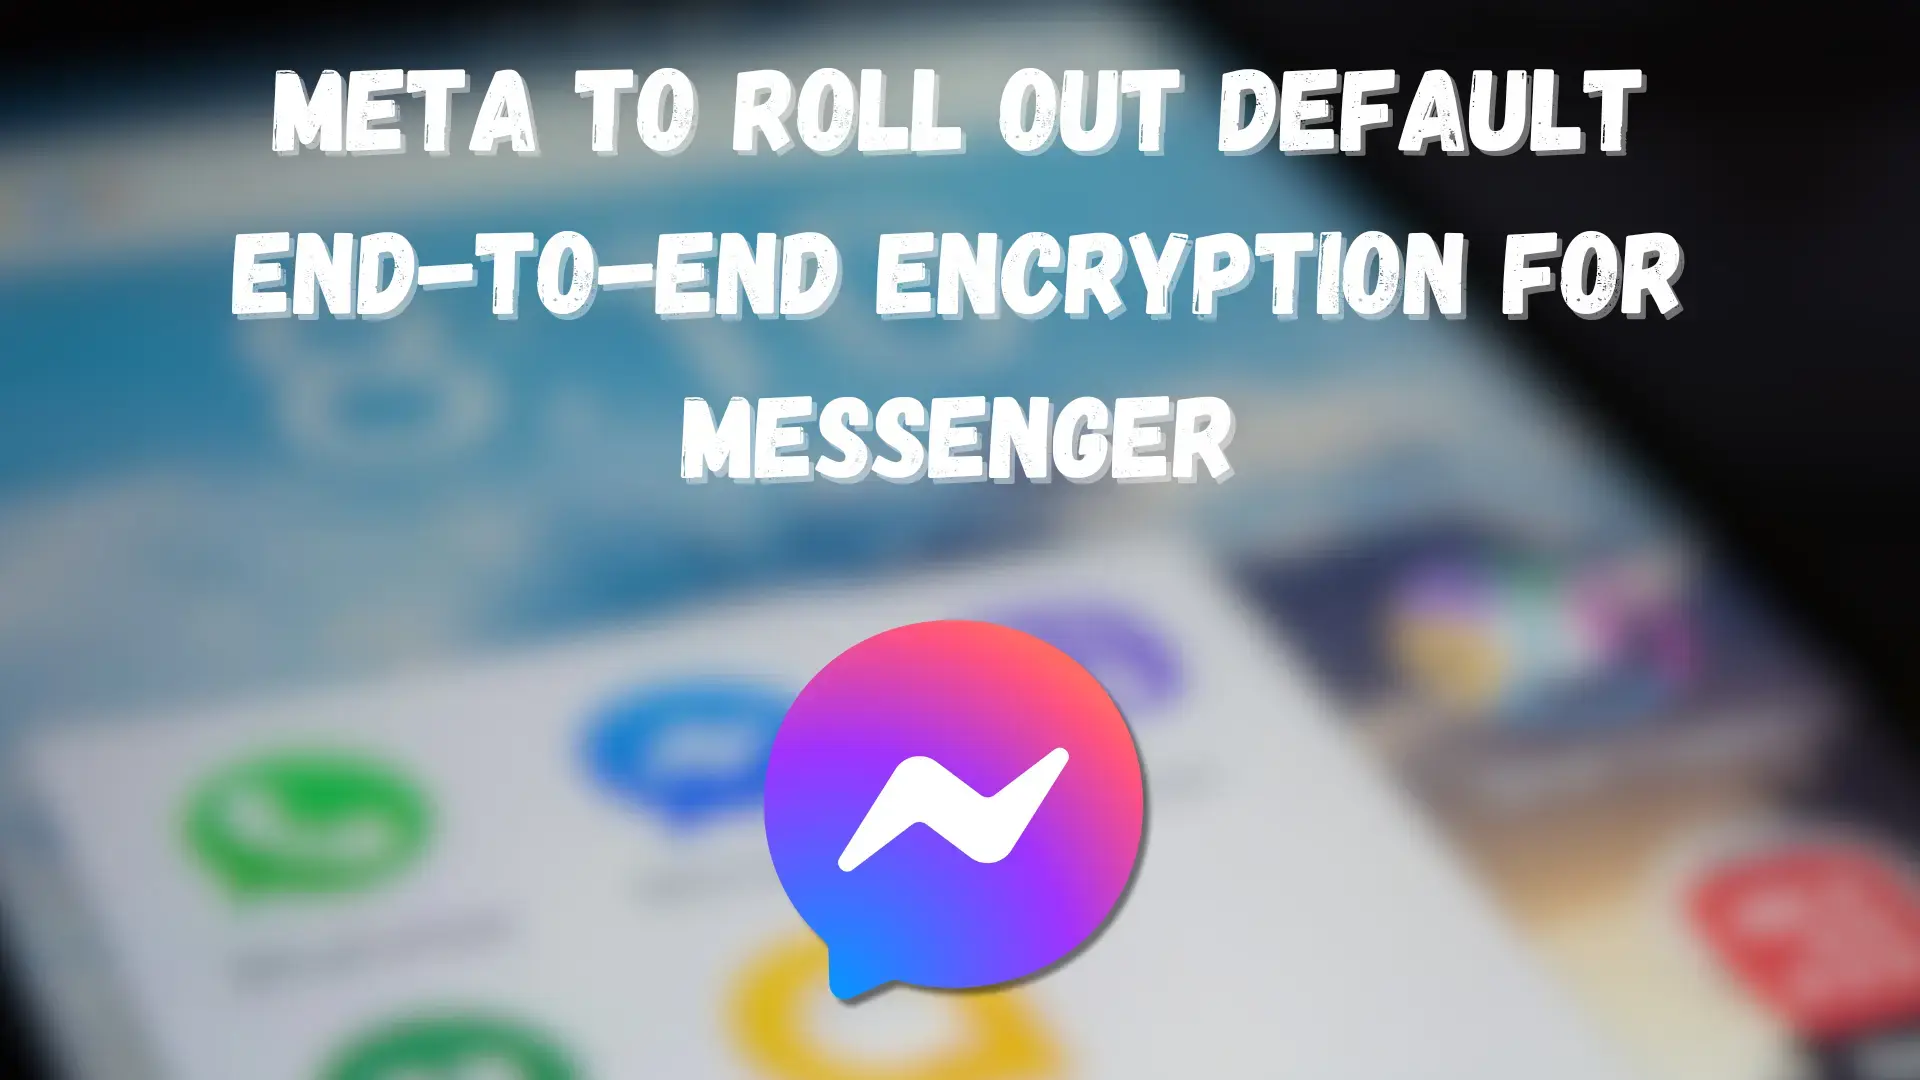 Meta to Roll Out Default End-to-End Encryption for Messenger